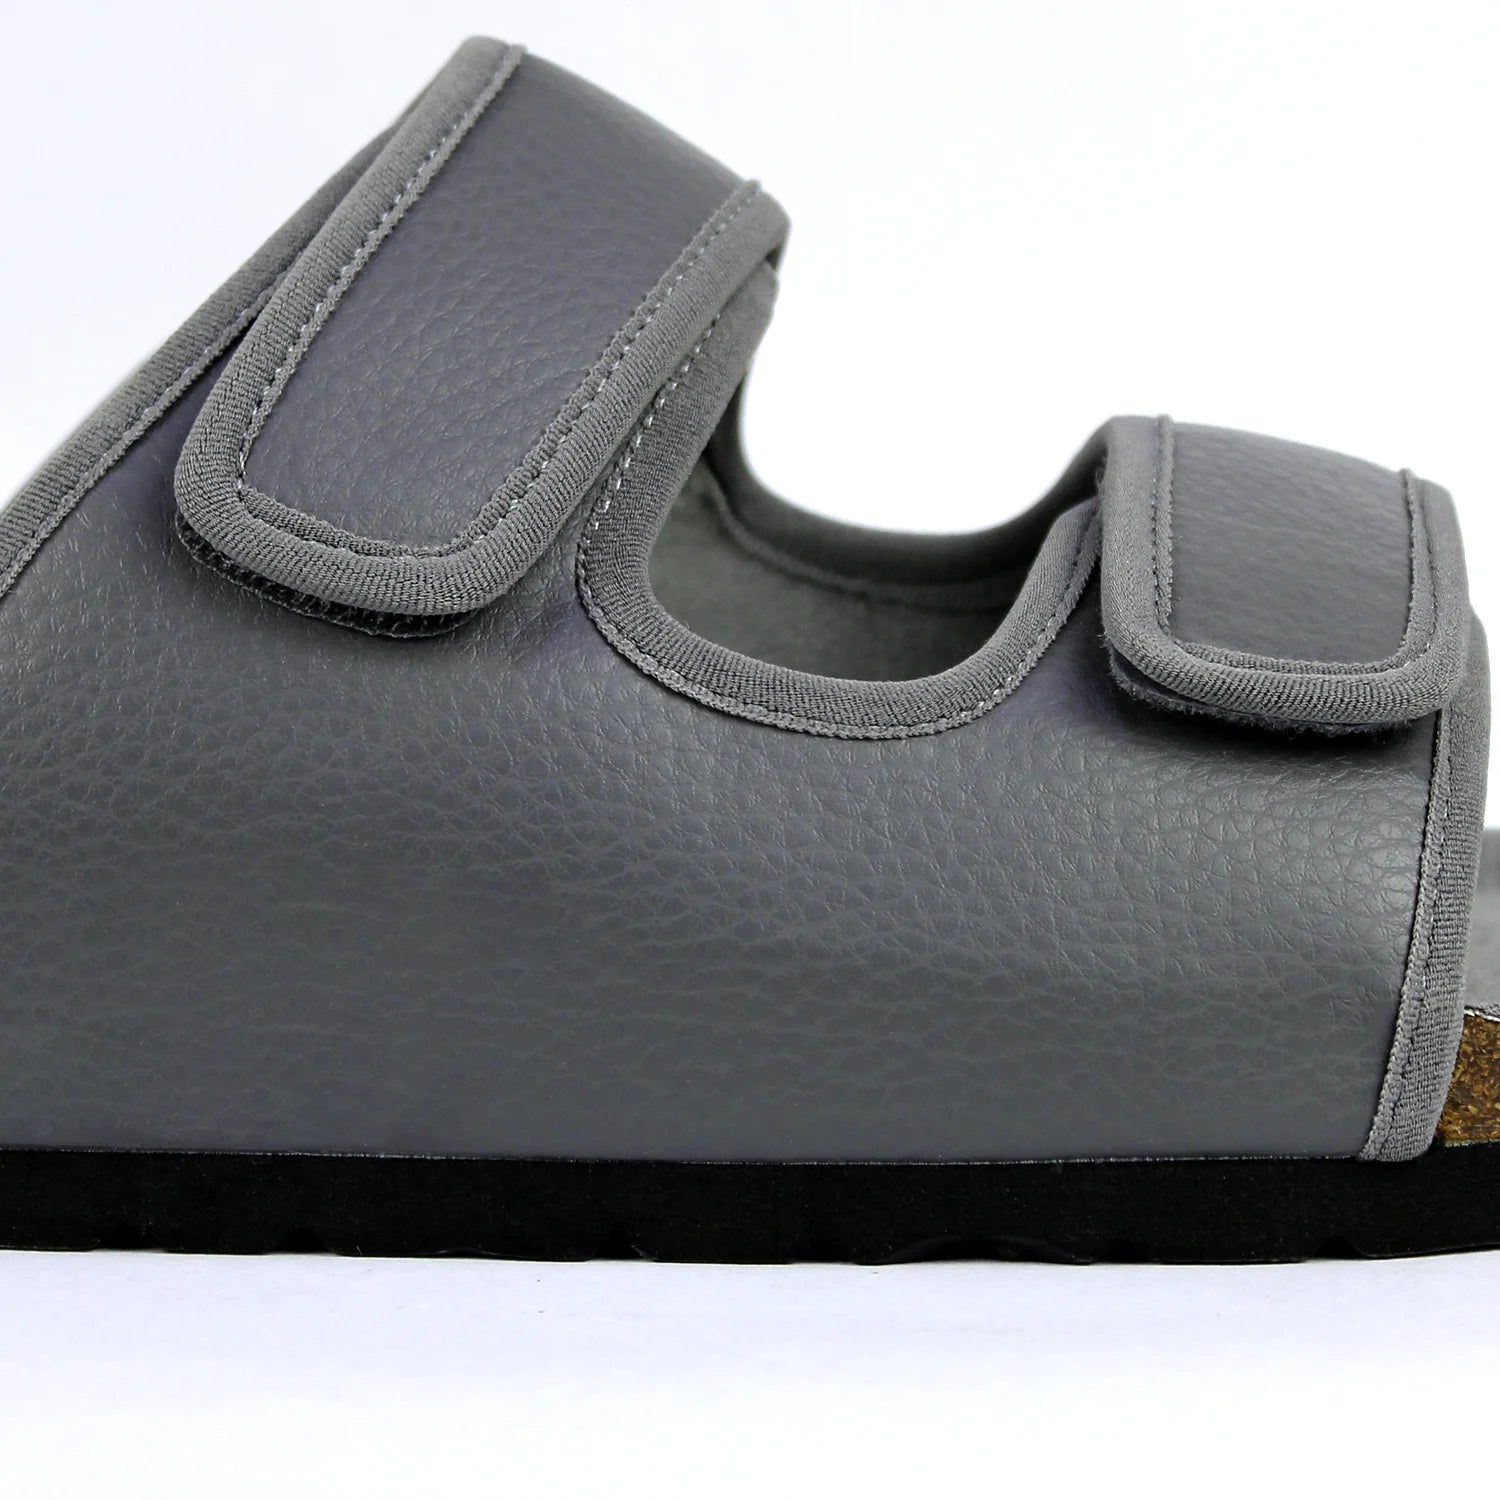 Cloudy Grey sandals for men, crafted from cork material for optimal comfort throughout the day